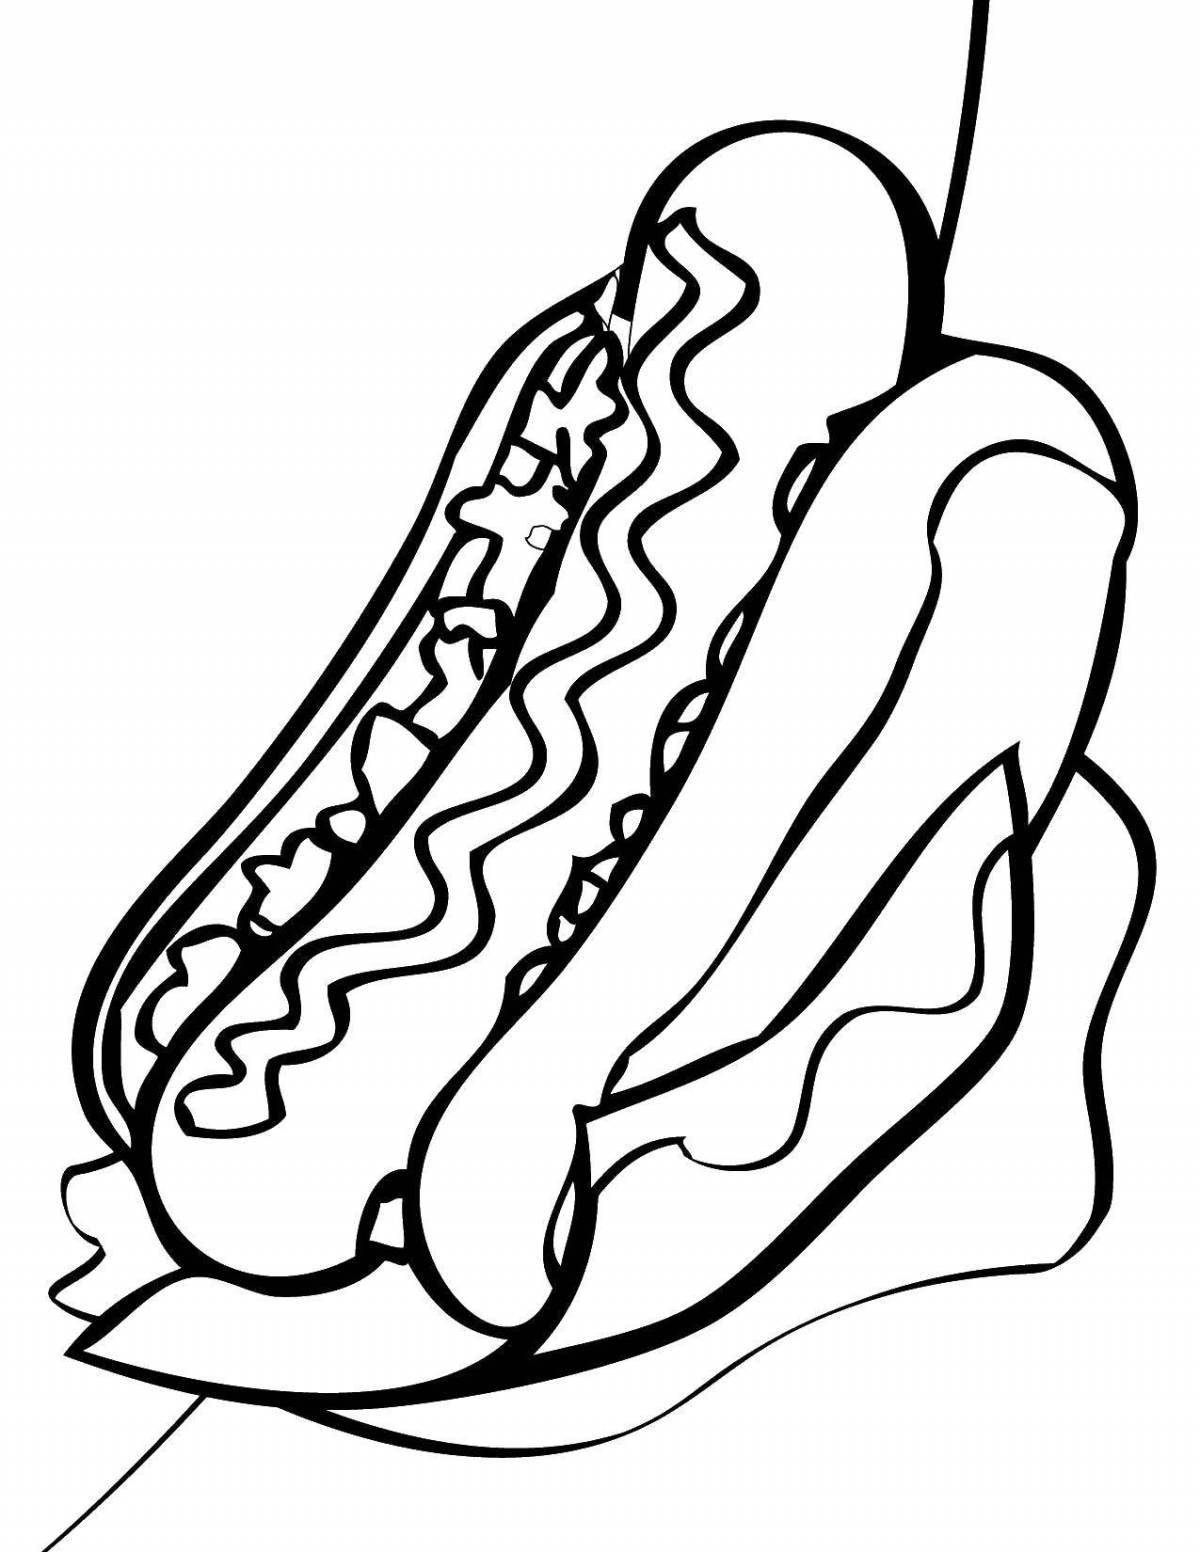 Spicy hot dog coloring page